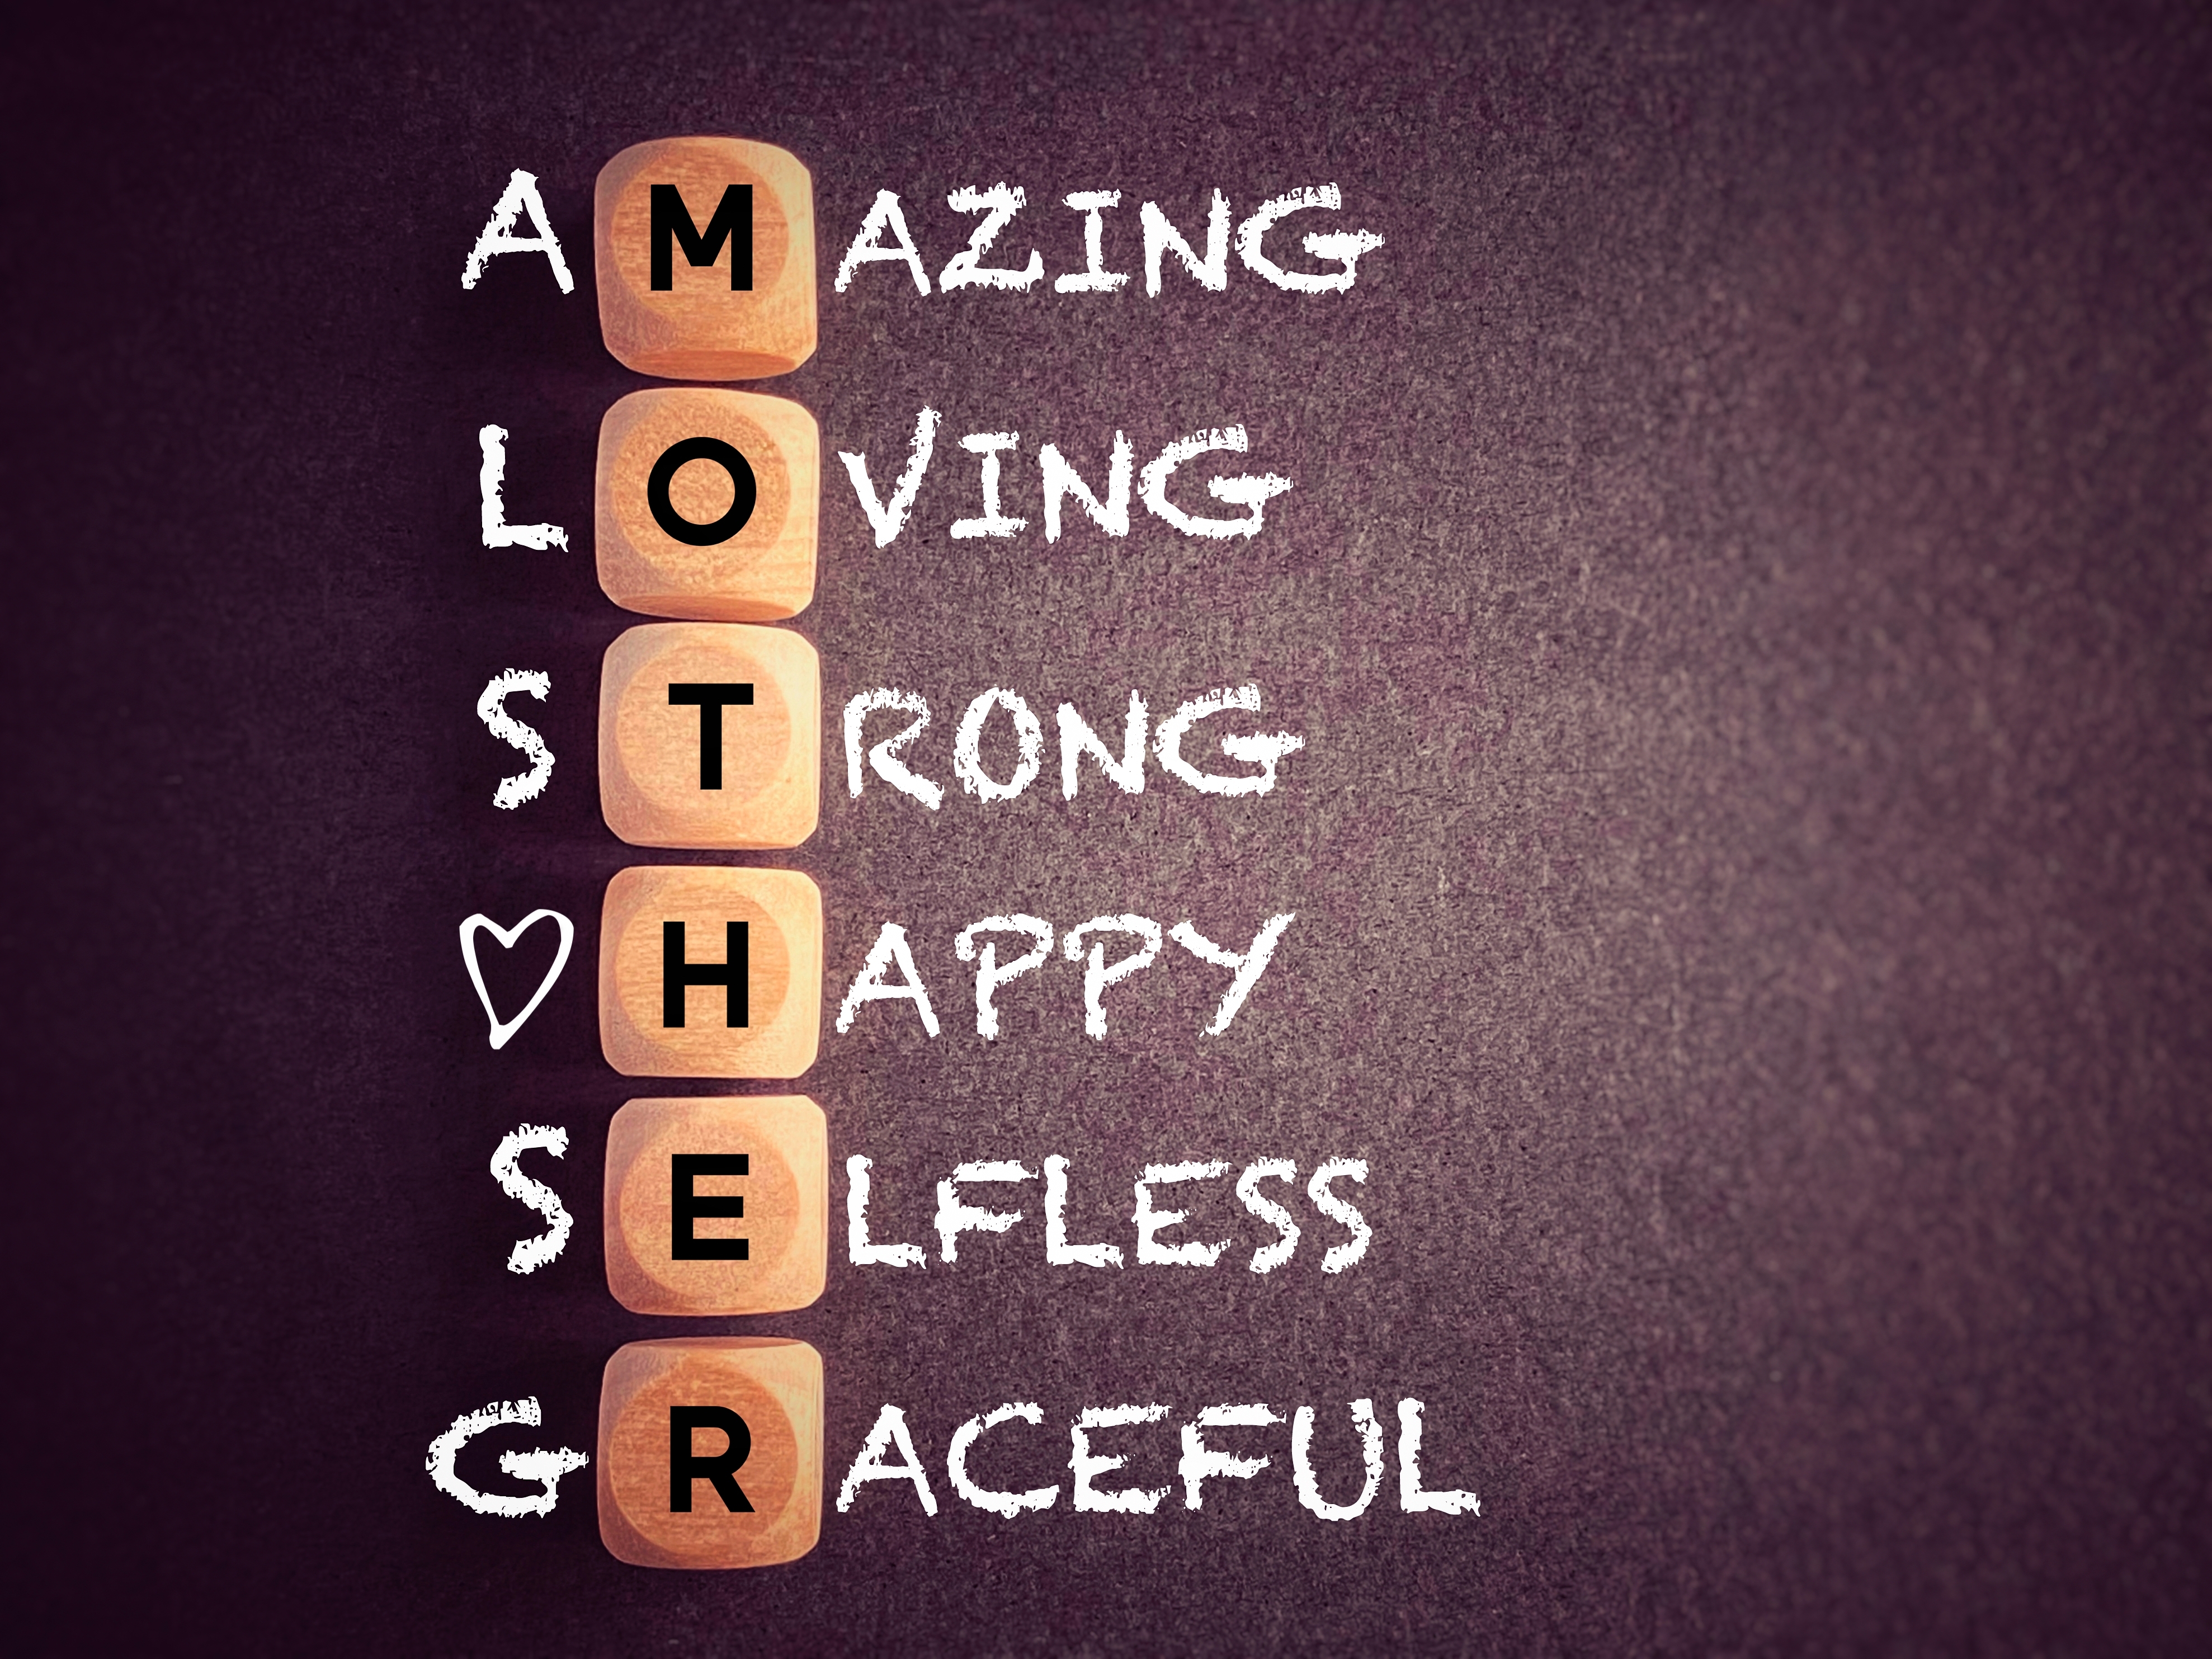 Top 21 Mother's Day Gift Ideas for Your Mother in India 2023